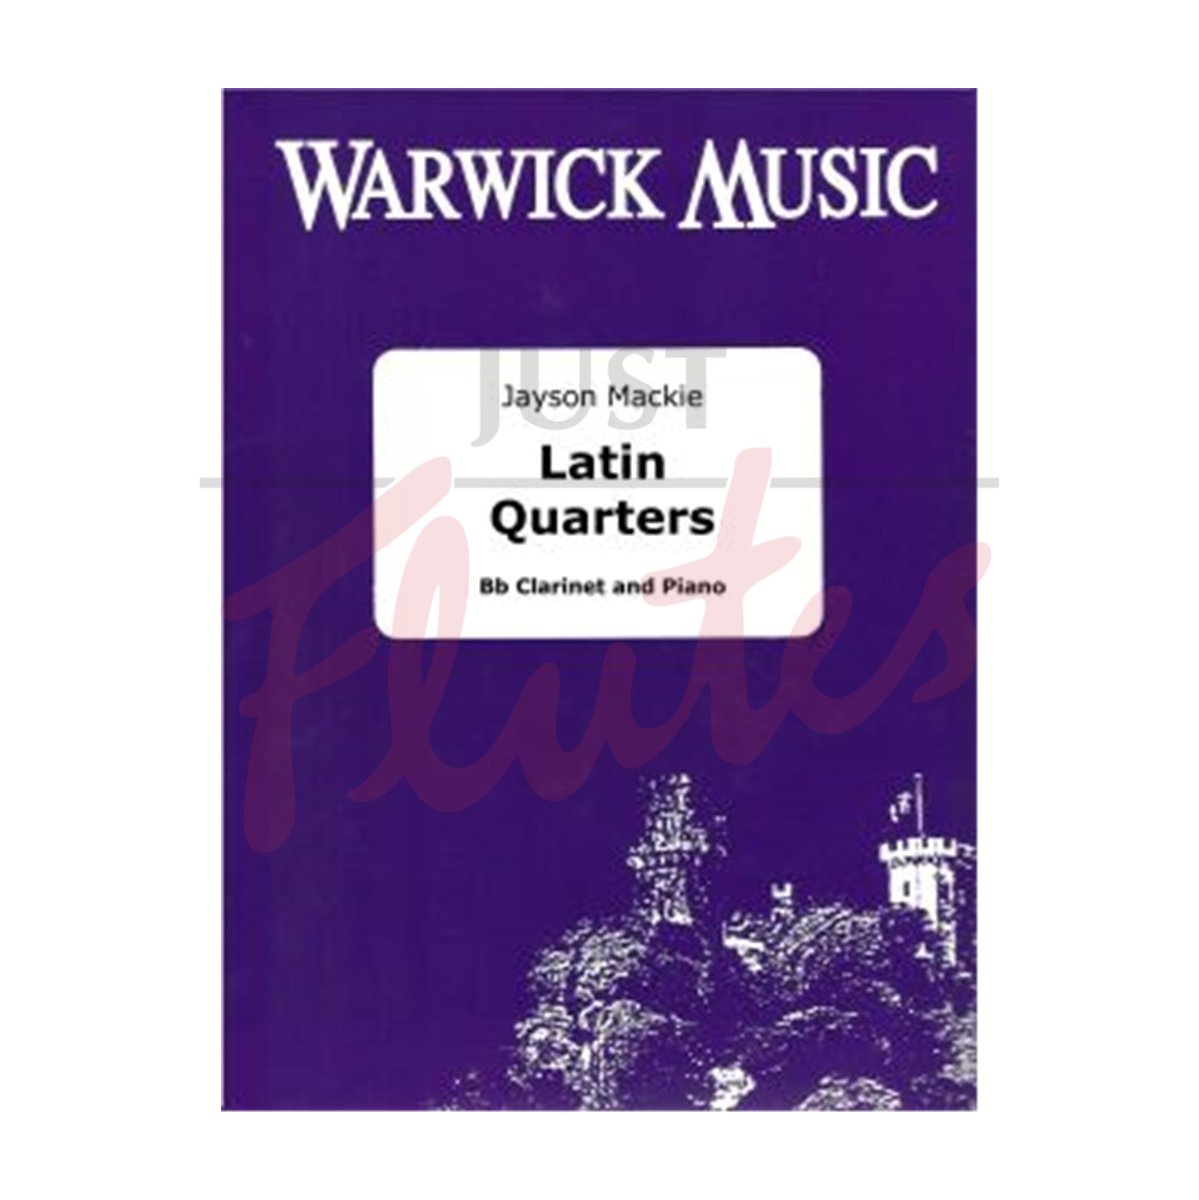 Latin Quarters for Clarinet and Piano